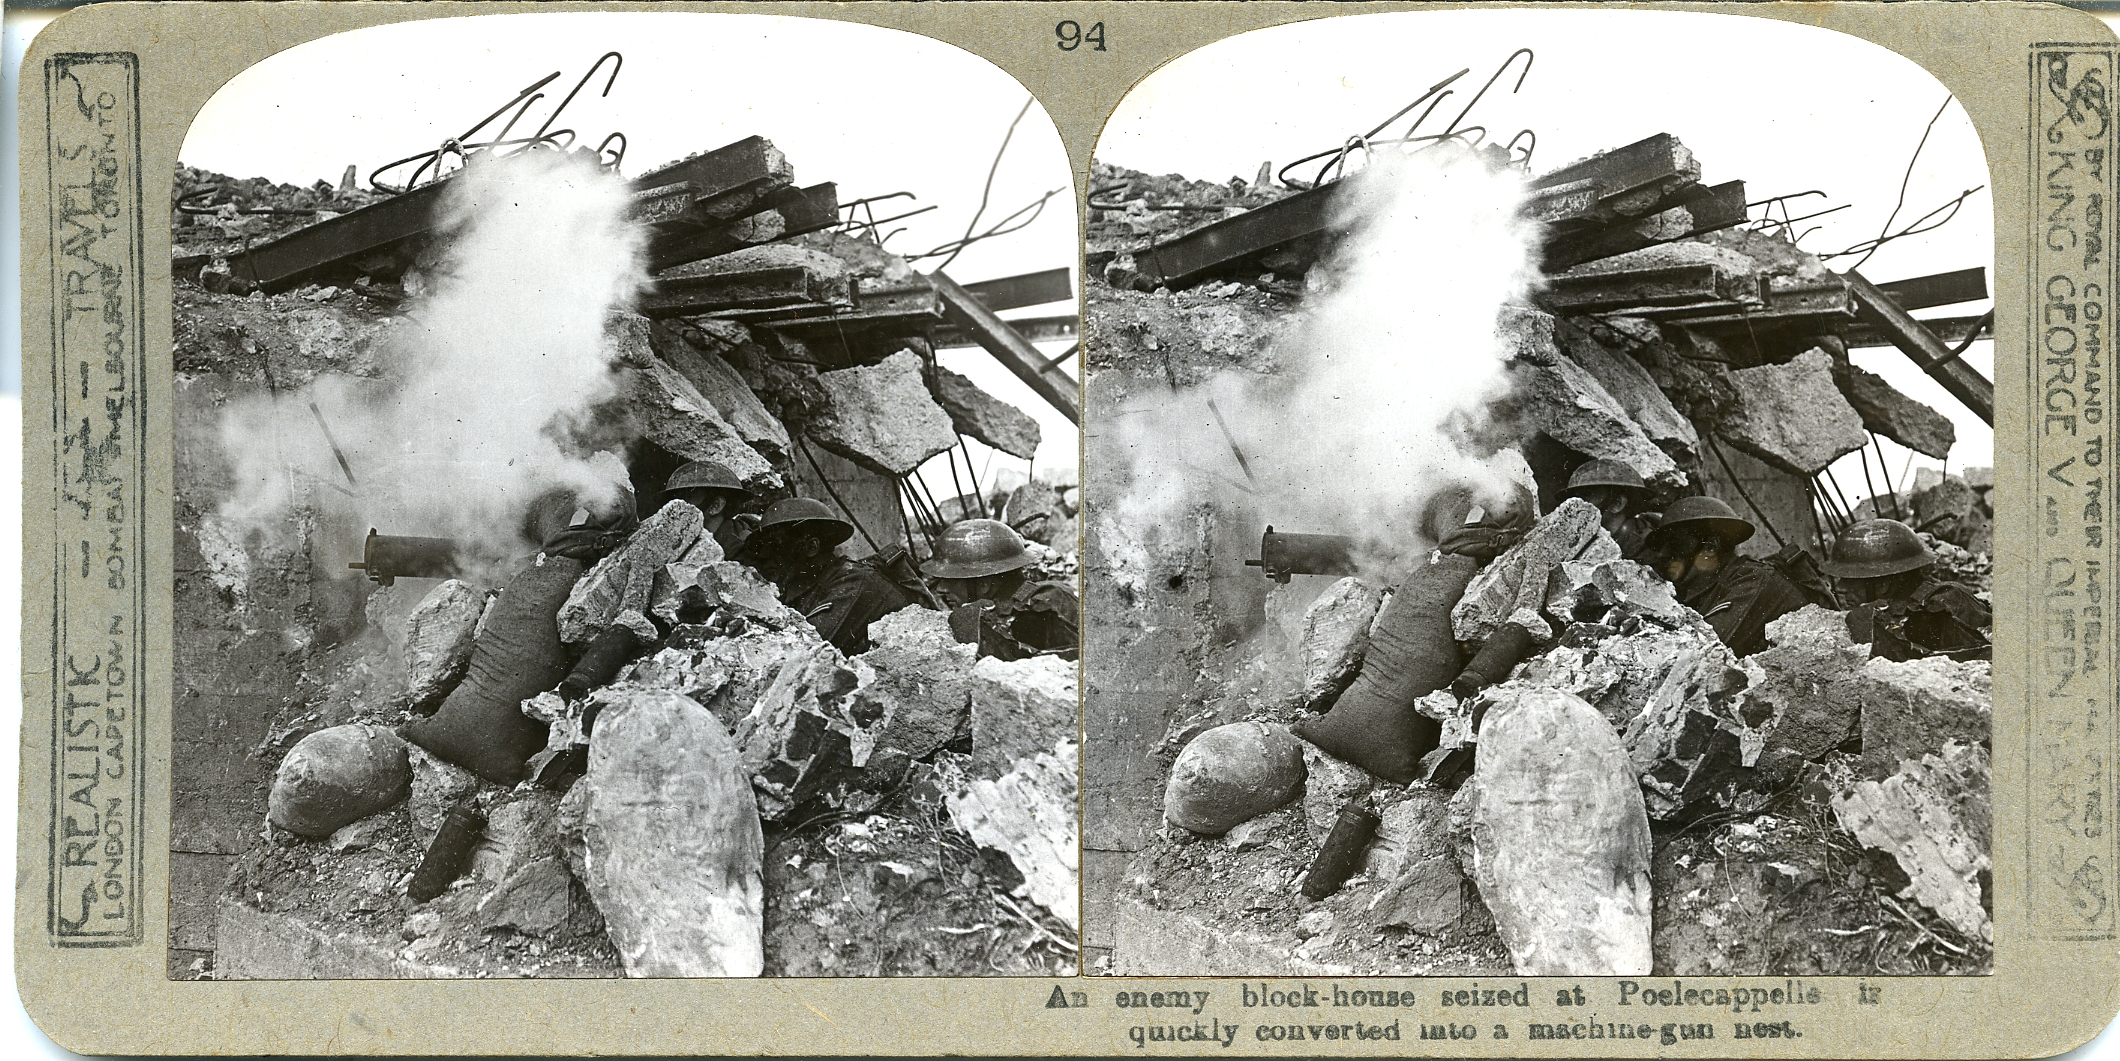 An enemy block-house seized at Poelecappelle is quickly converted into a machine-gun nest